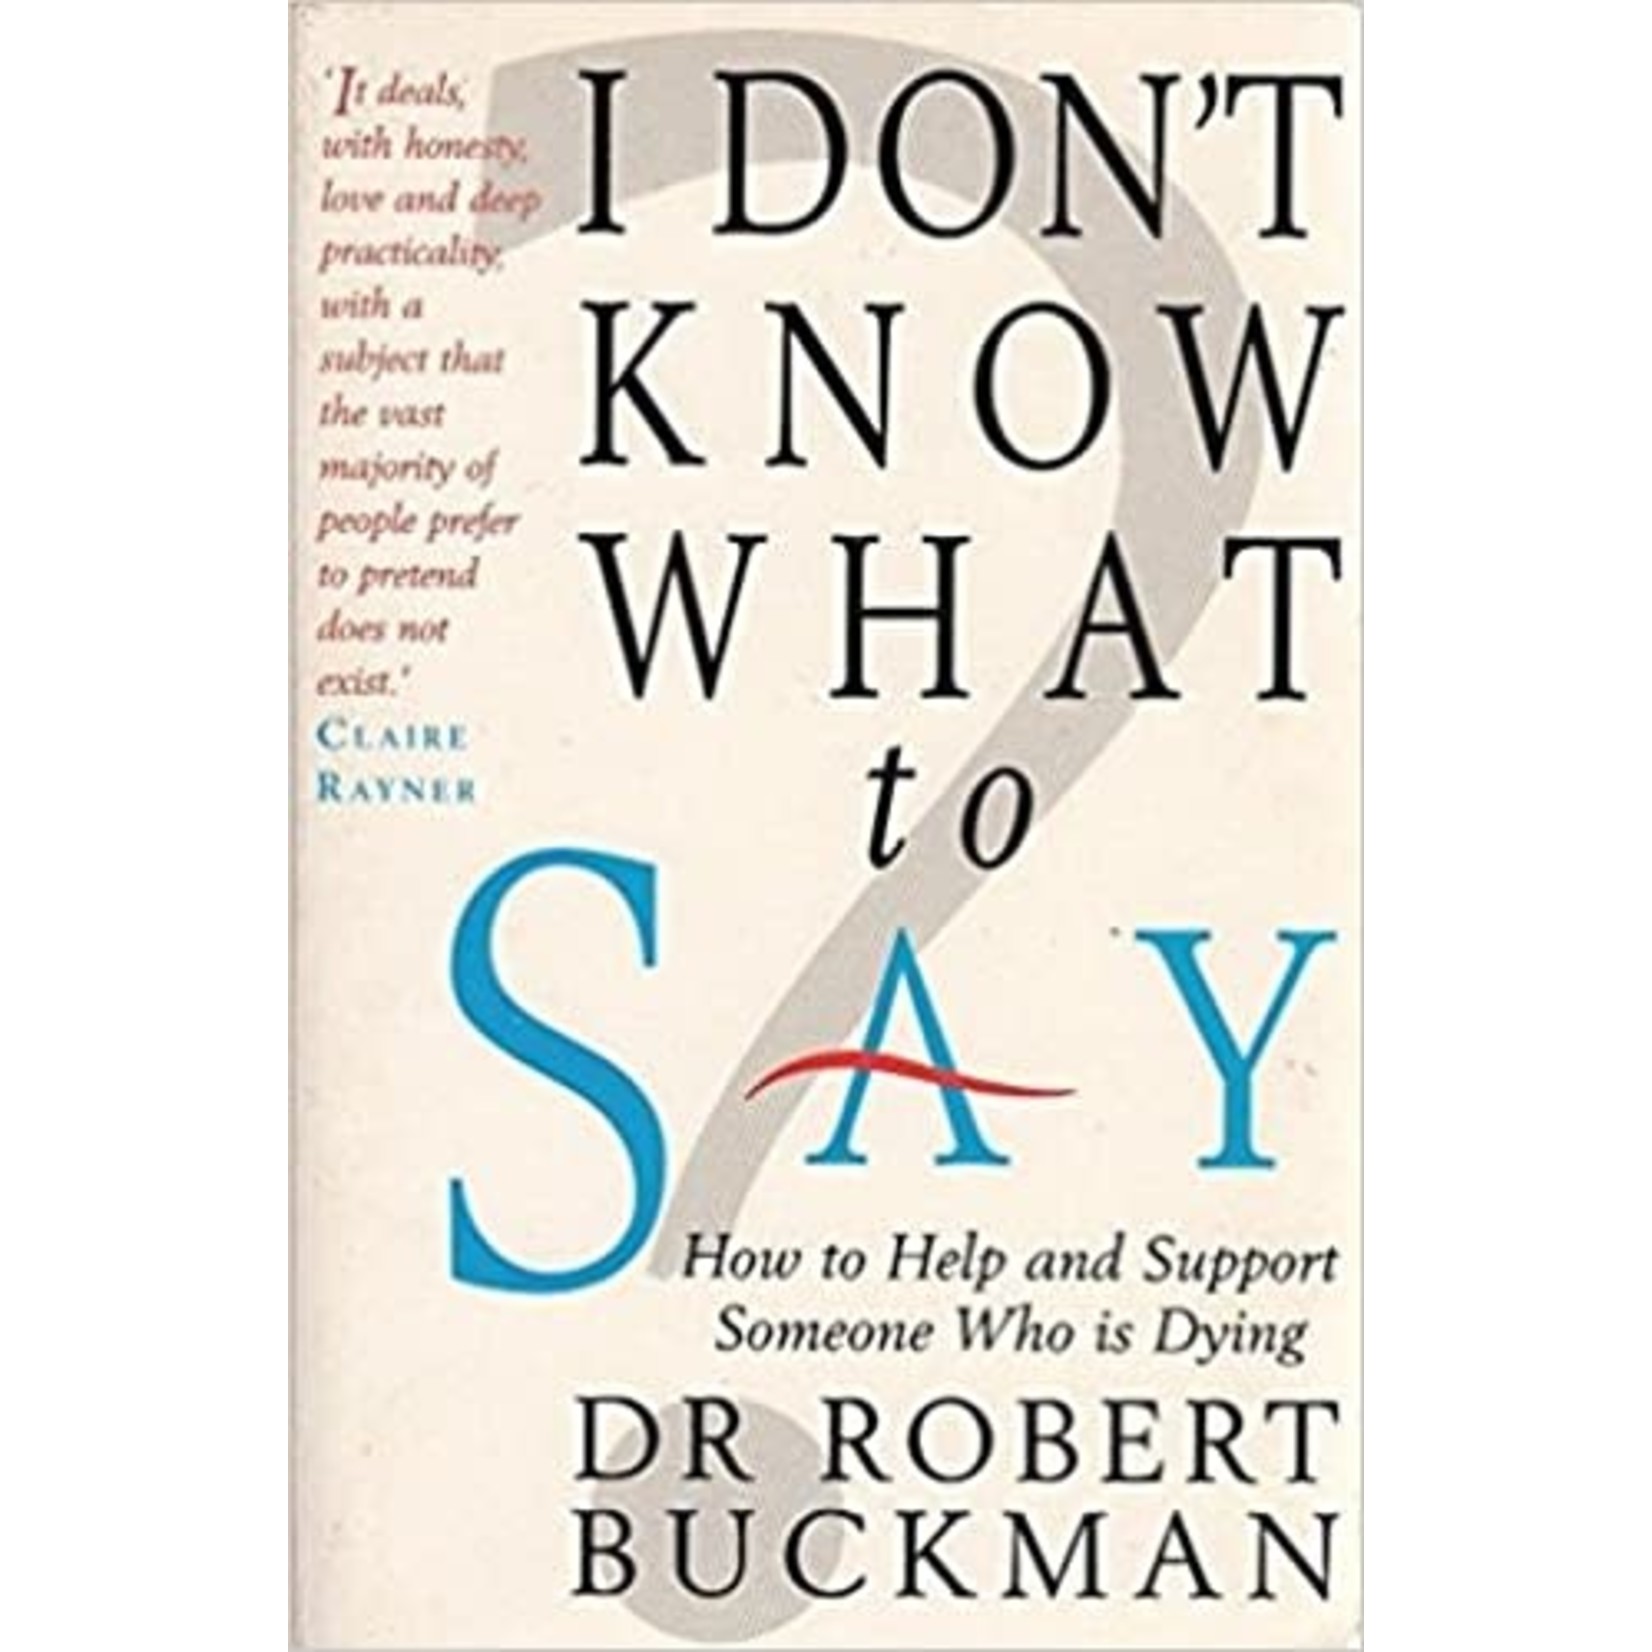 Dr. Robert Buckman "I Don't Know What to Say - How to Help and Support Smeone Who is Dying